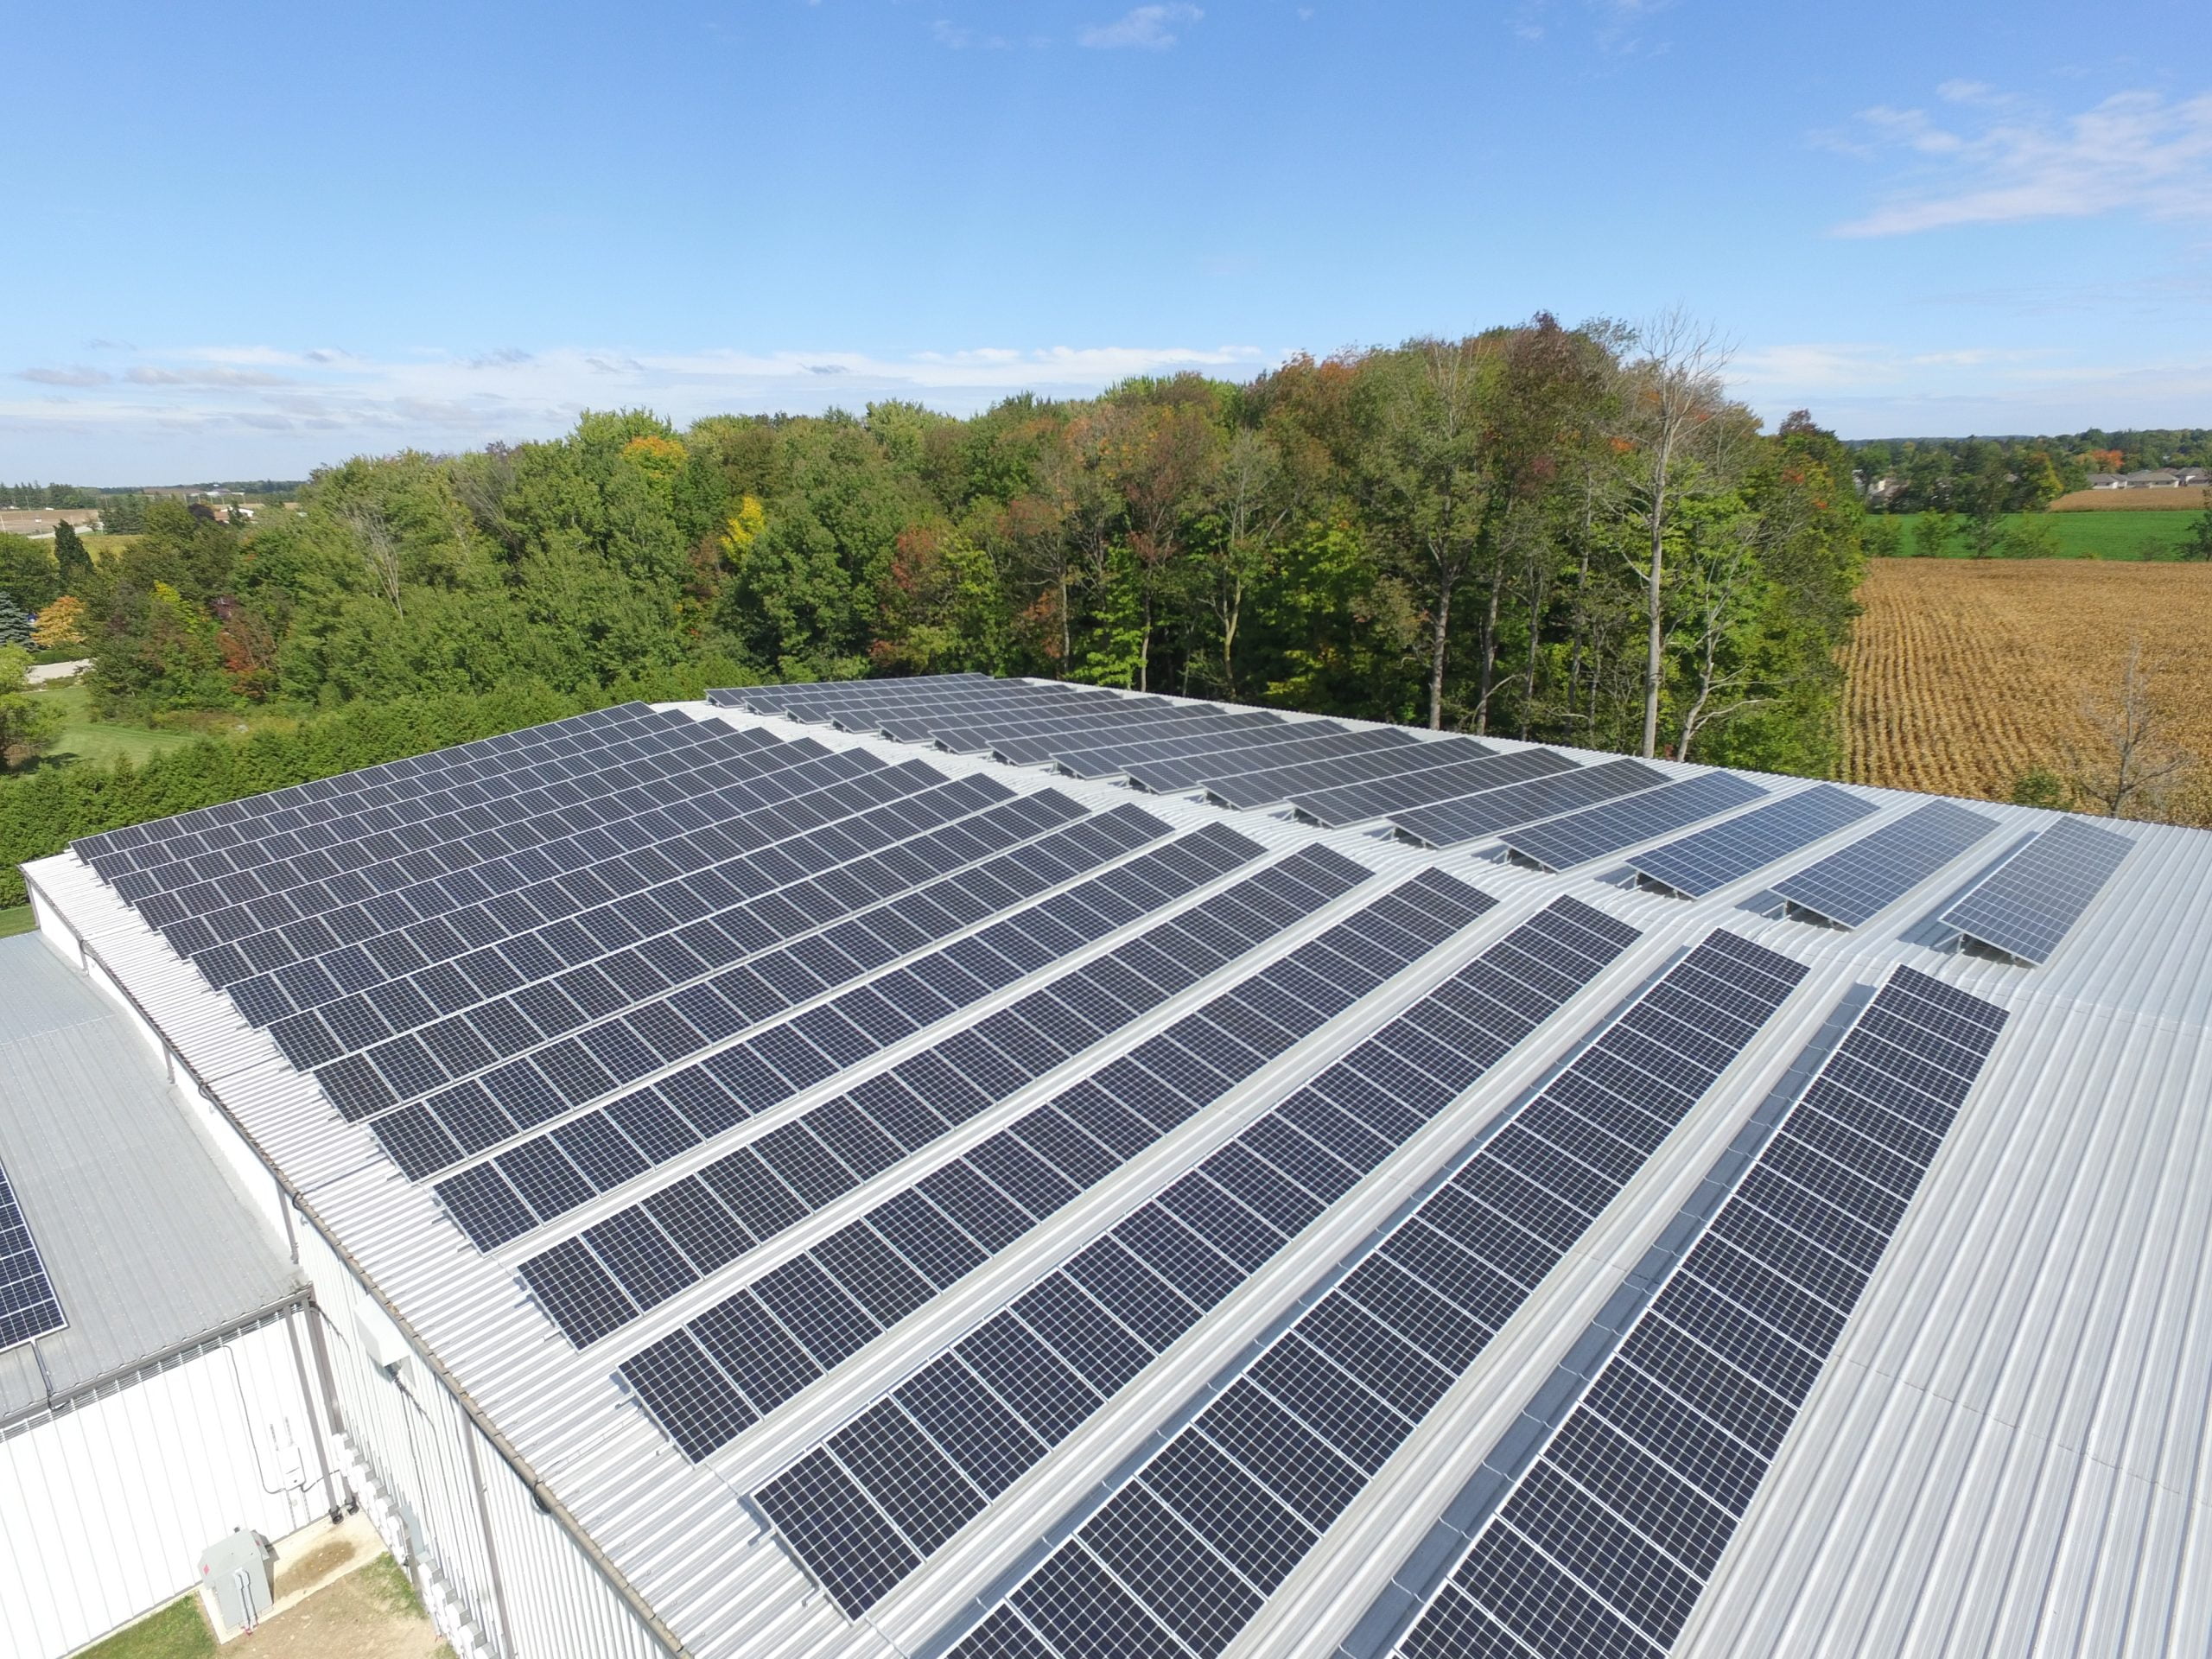 Aerial photo of a solar panel array on the roof of an industrial building in the countryside.